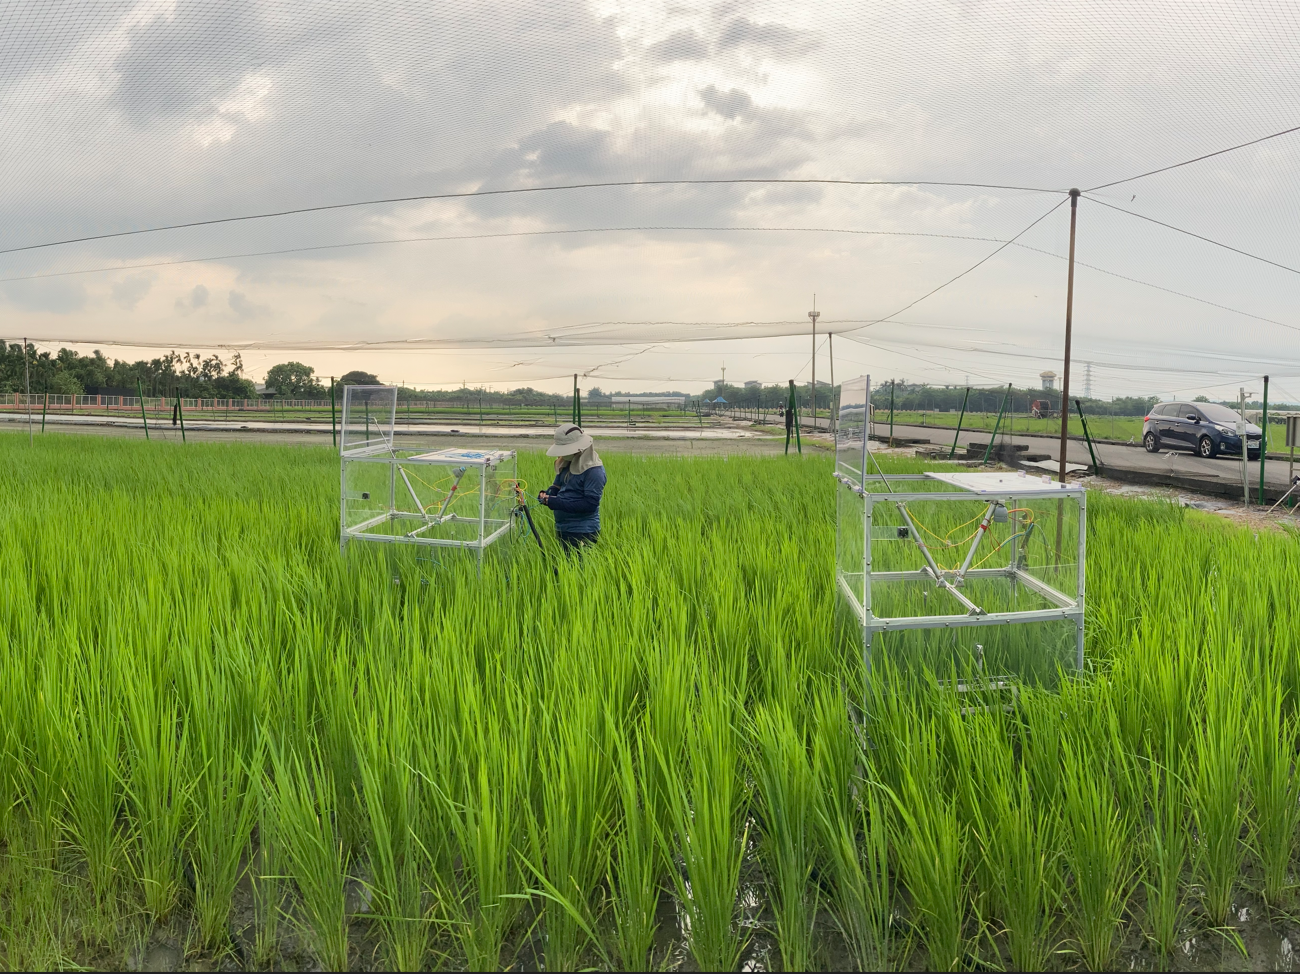 NTU Agricultural Net-Zero Carbon Technology and Management Innovation Research Center (ANZC): Advancing Agricultural Net-Zero Technology